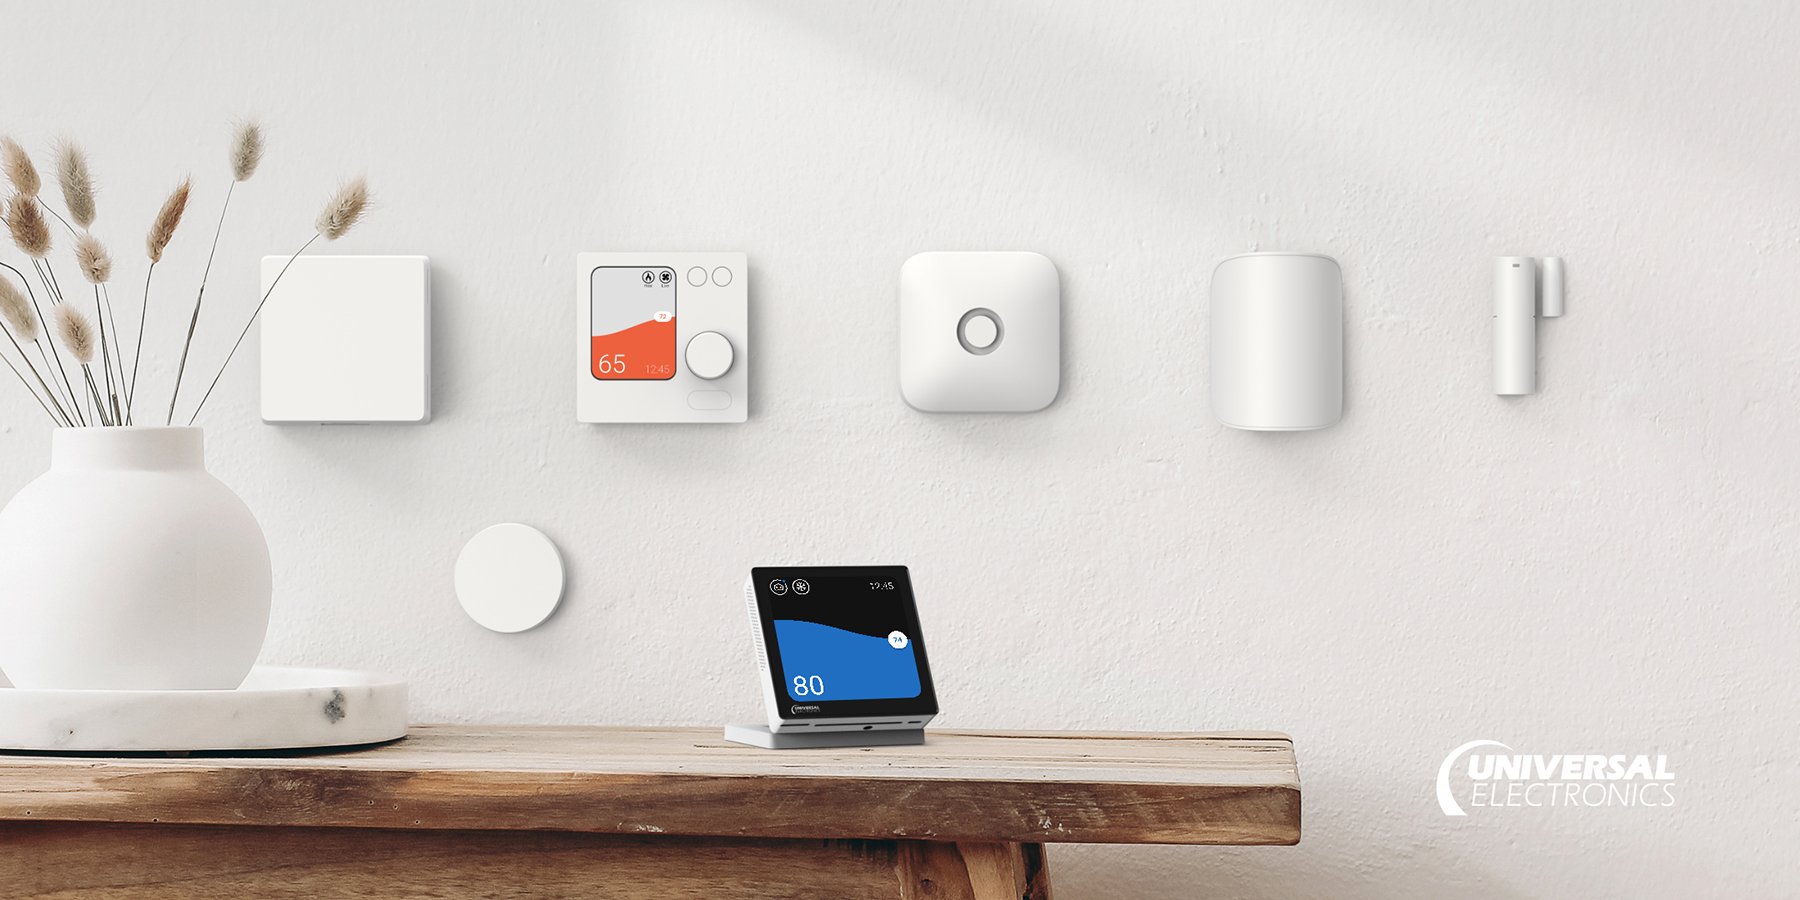 Does Vivint Work With Homekit? You Need Third-Party Support  